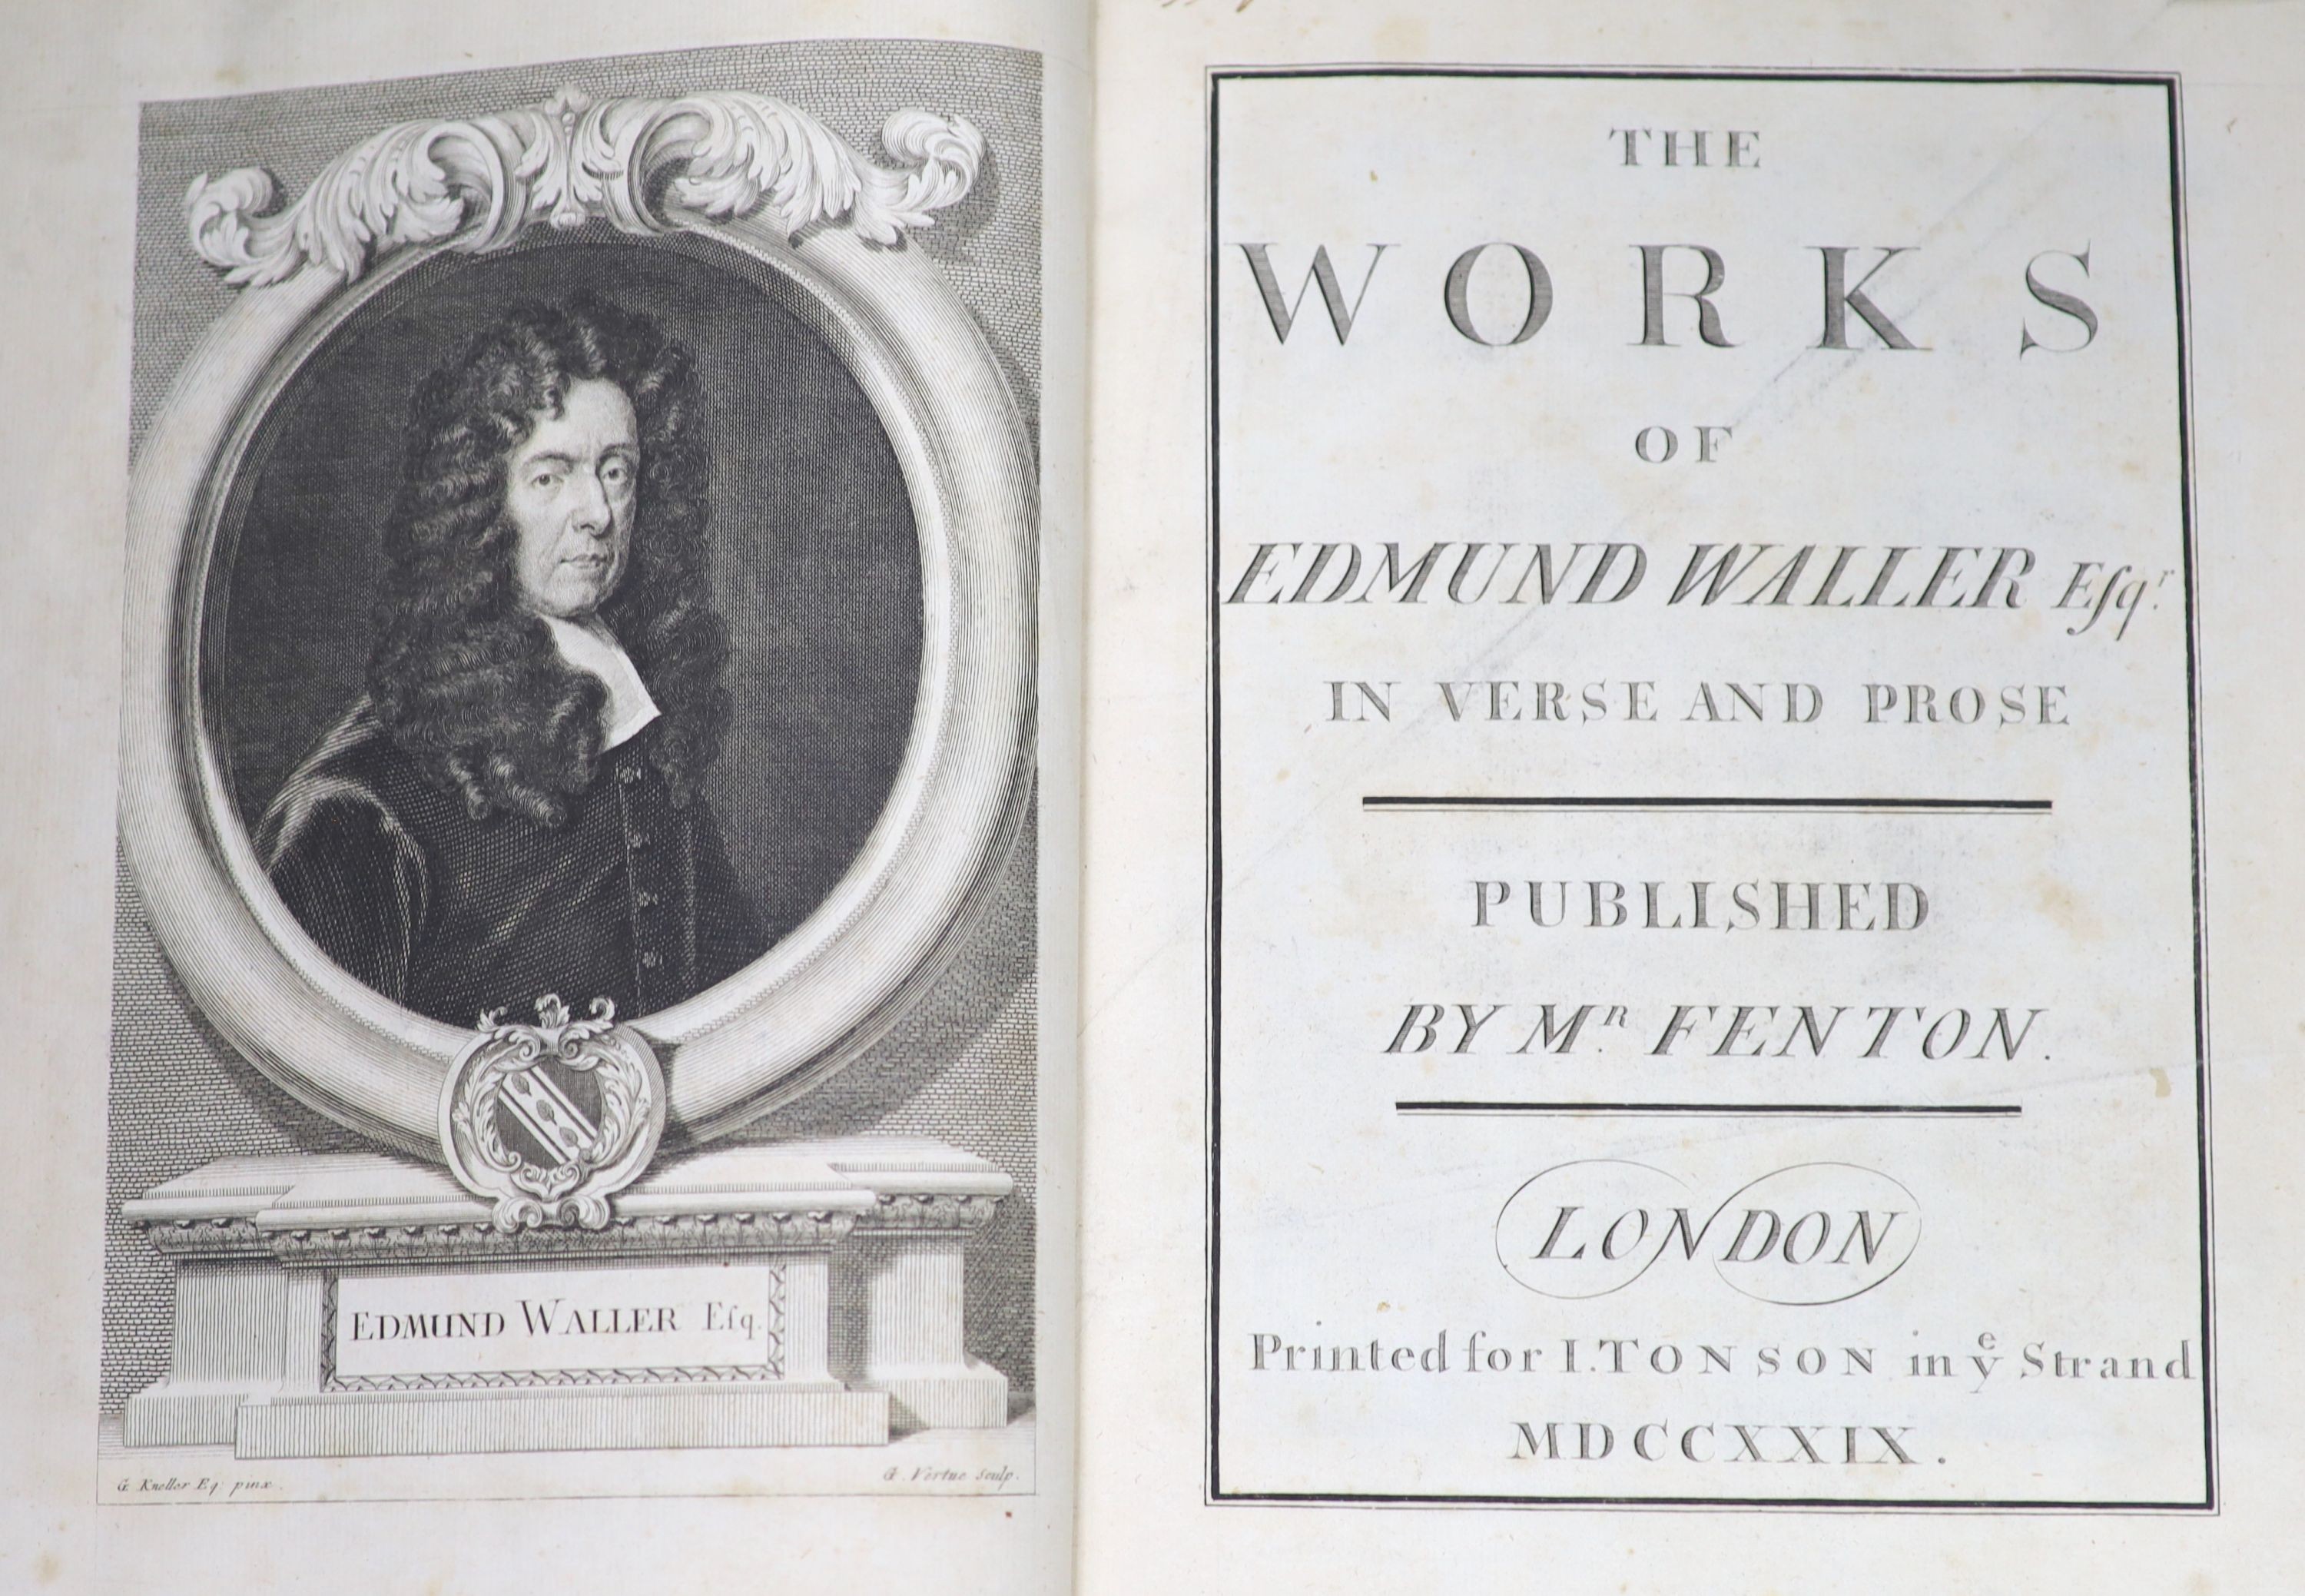 Waller, Edmund - The Works, qto, original calf, portrait frontispiece by Vertu, after Kneller, two full page engraved plates, Mr. Fenton, London, 1729